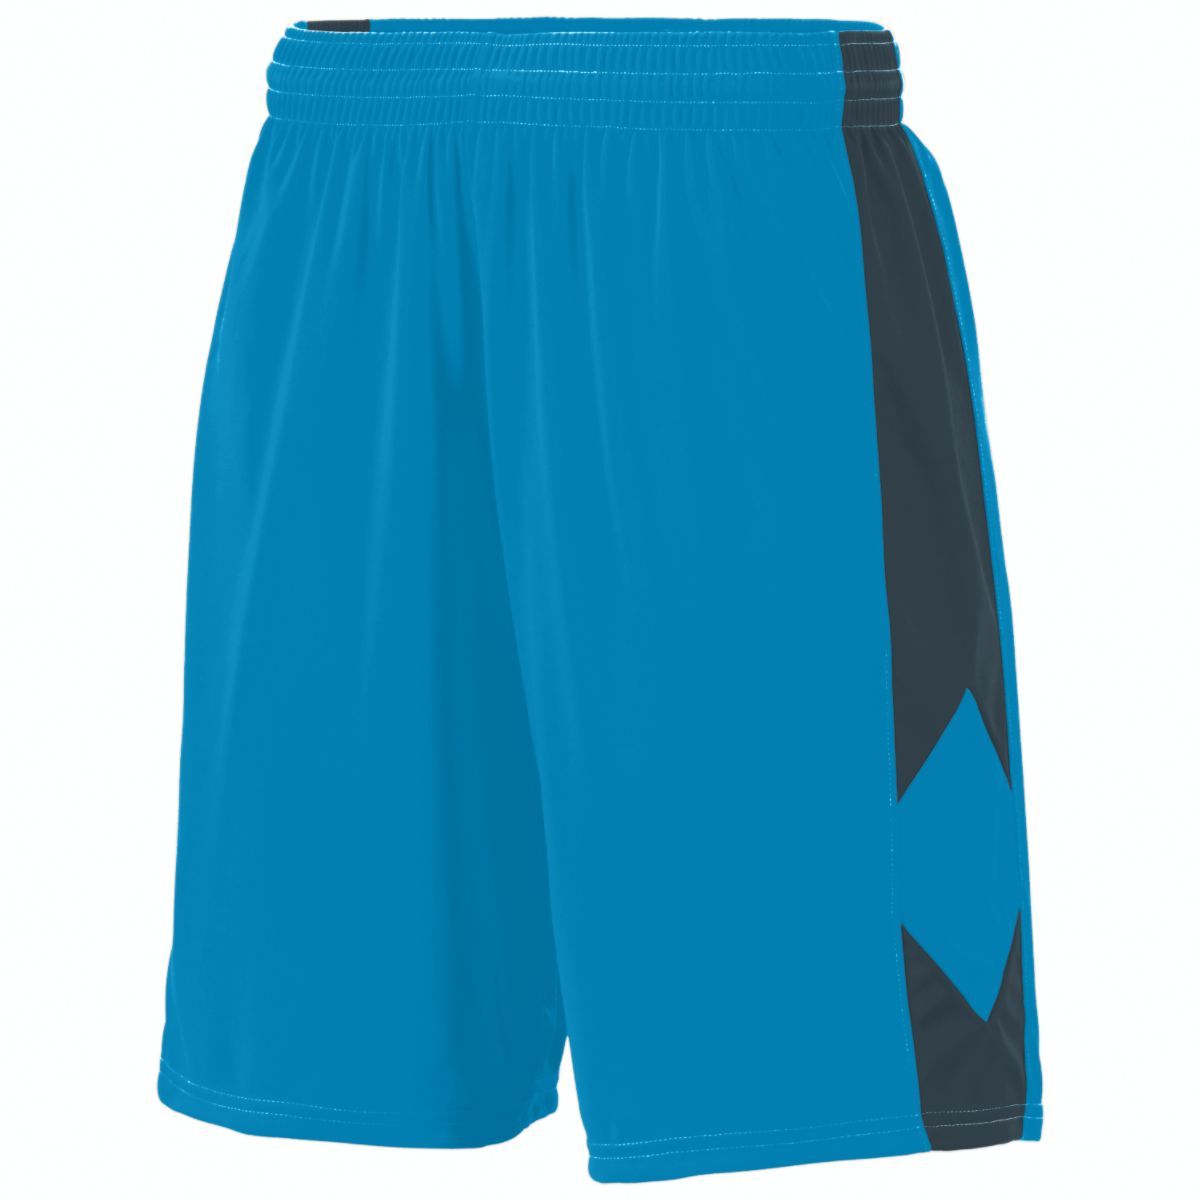 Augusta Sportswear Youth Block Out Shorts in Power Blue/Slate  -Part of the Youth, Youth-Shorts, Augusta-Products, Basketball, All-Sports, All-Sports-1 product lines at KanaleyCreations.com